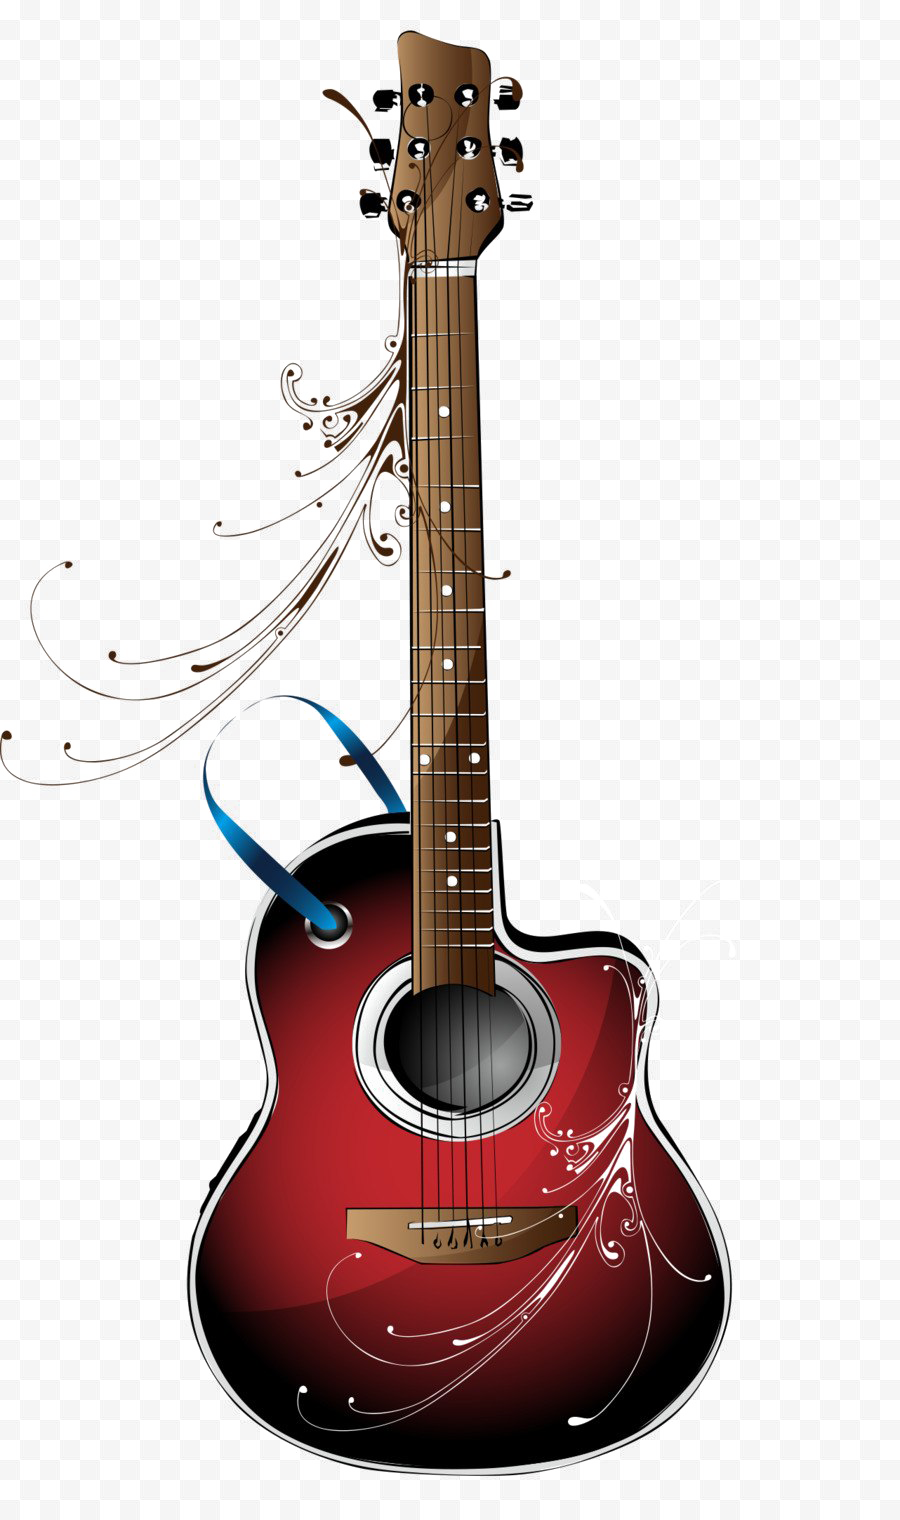 Red Electric Guitar PNG Free Download